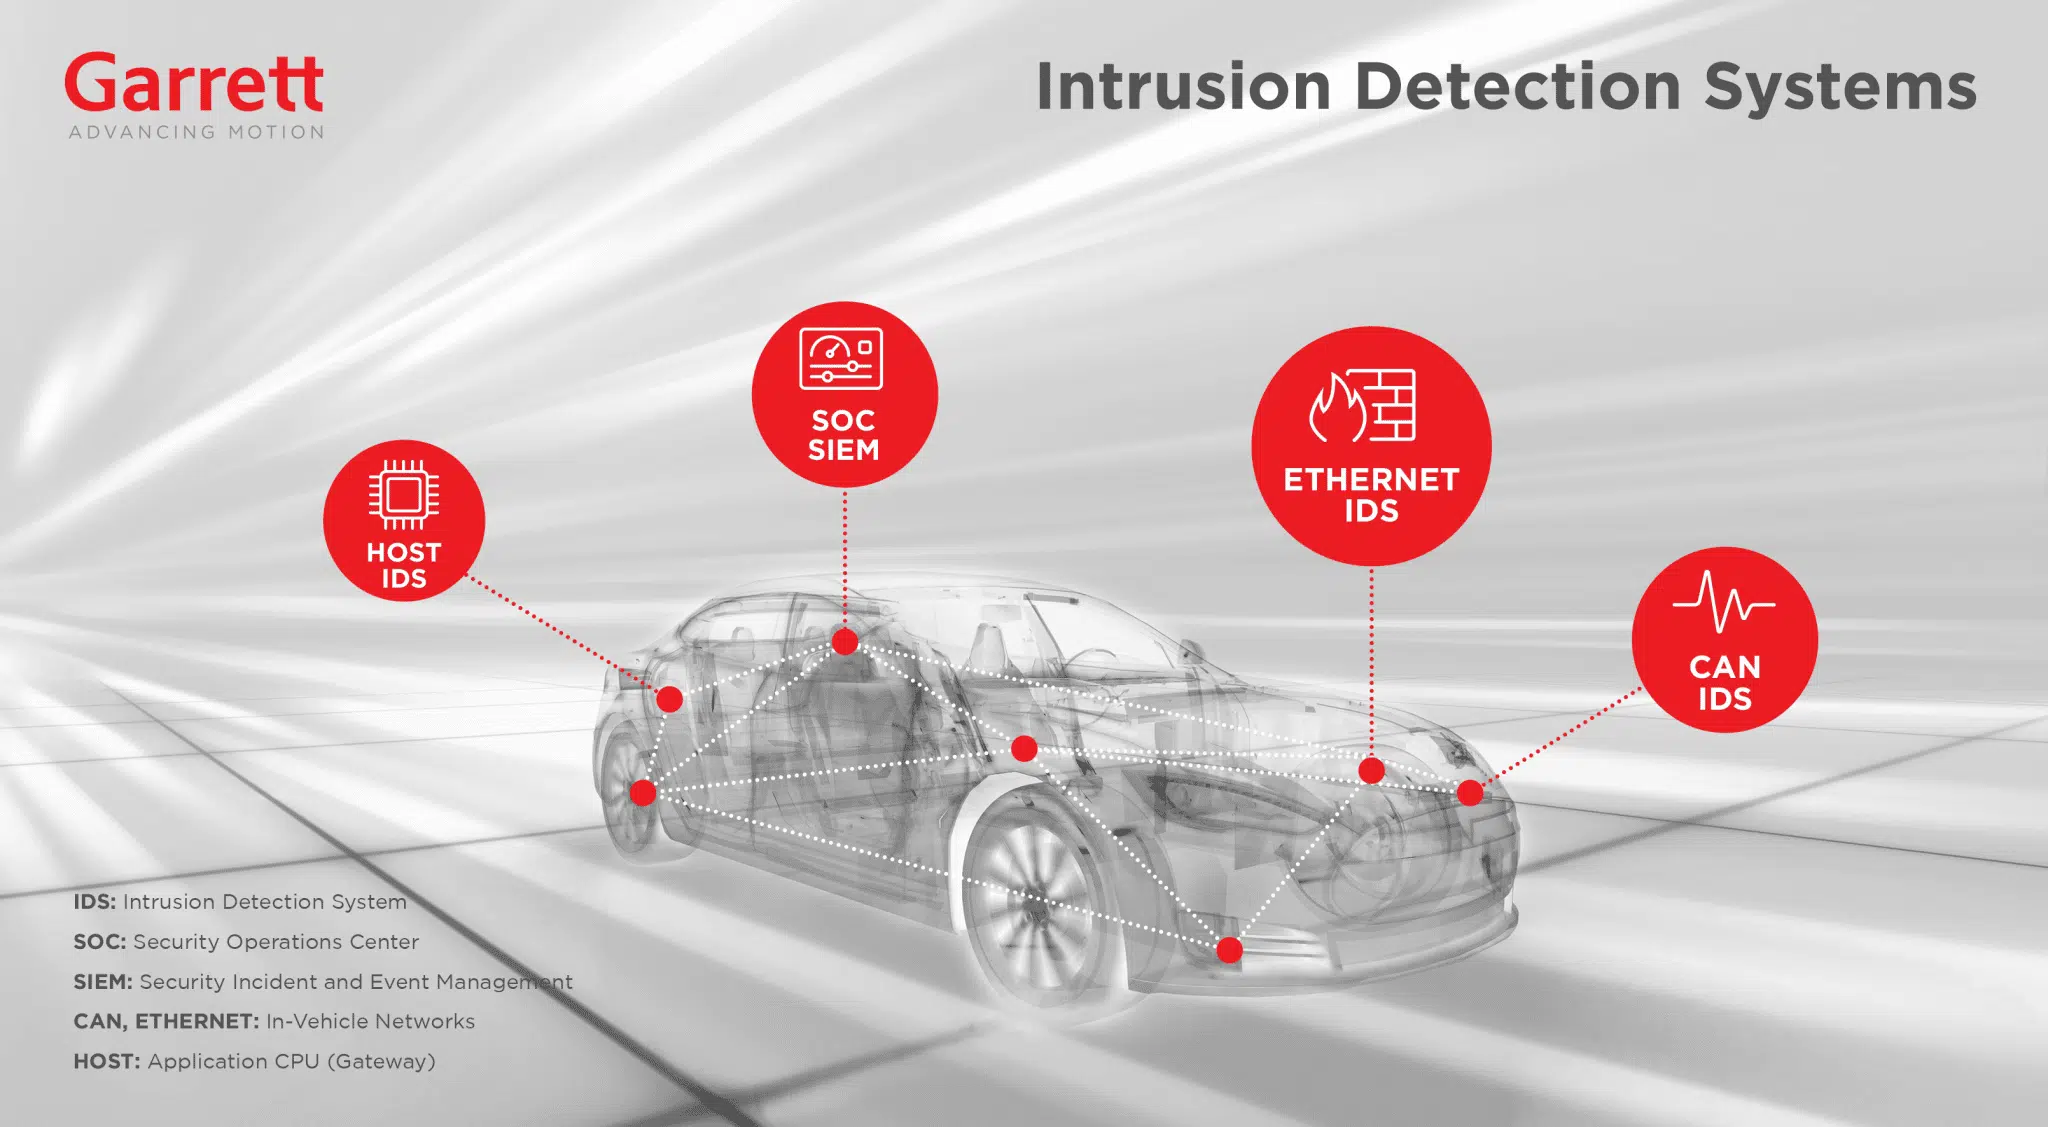 Intrusion detection systems